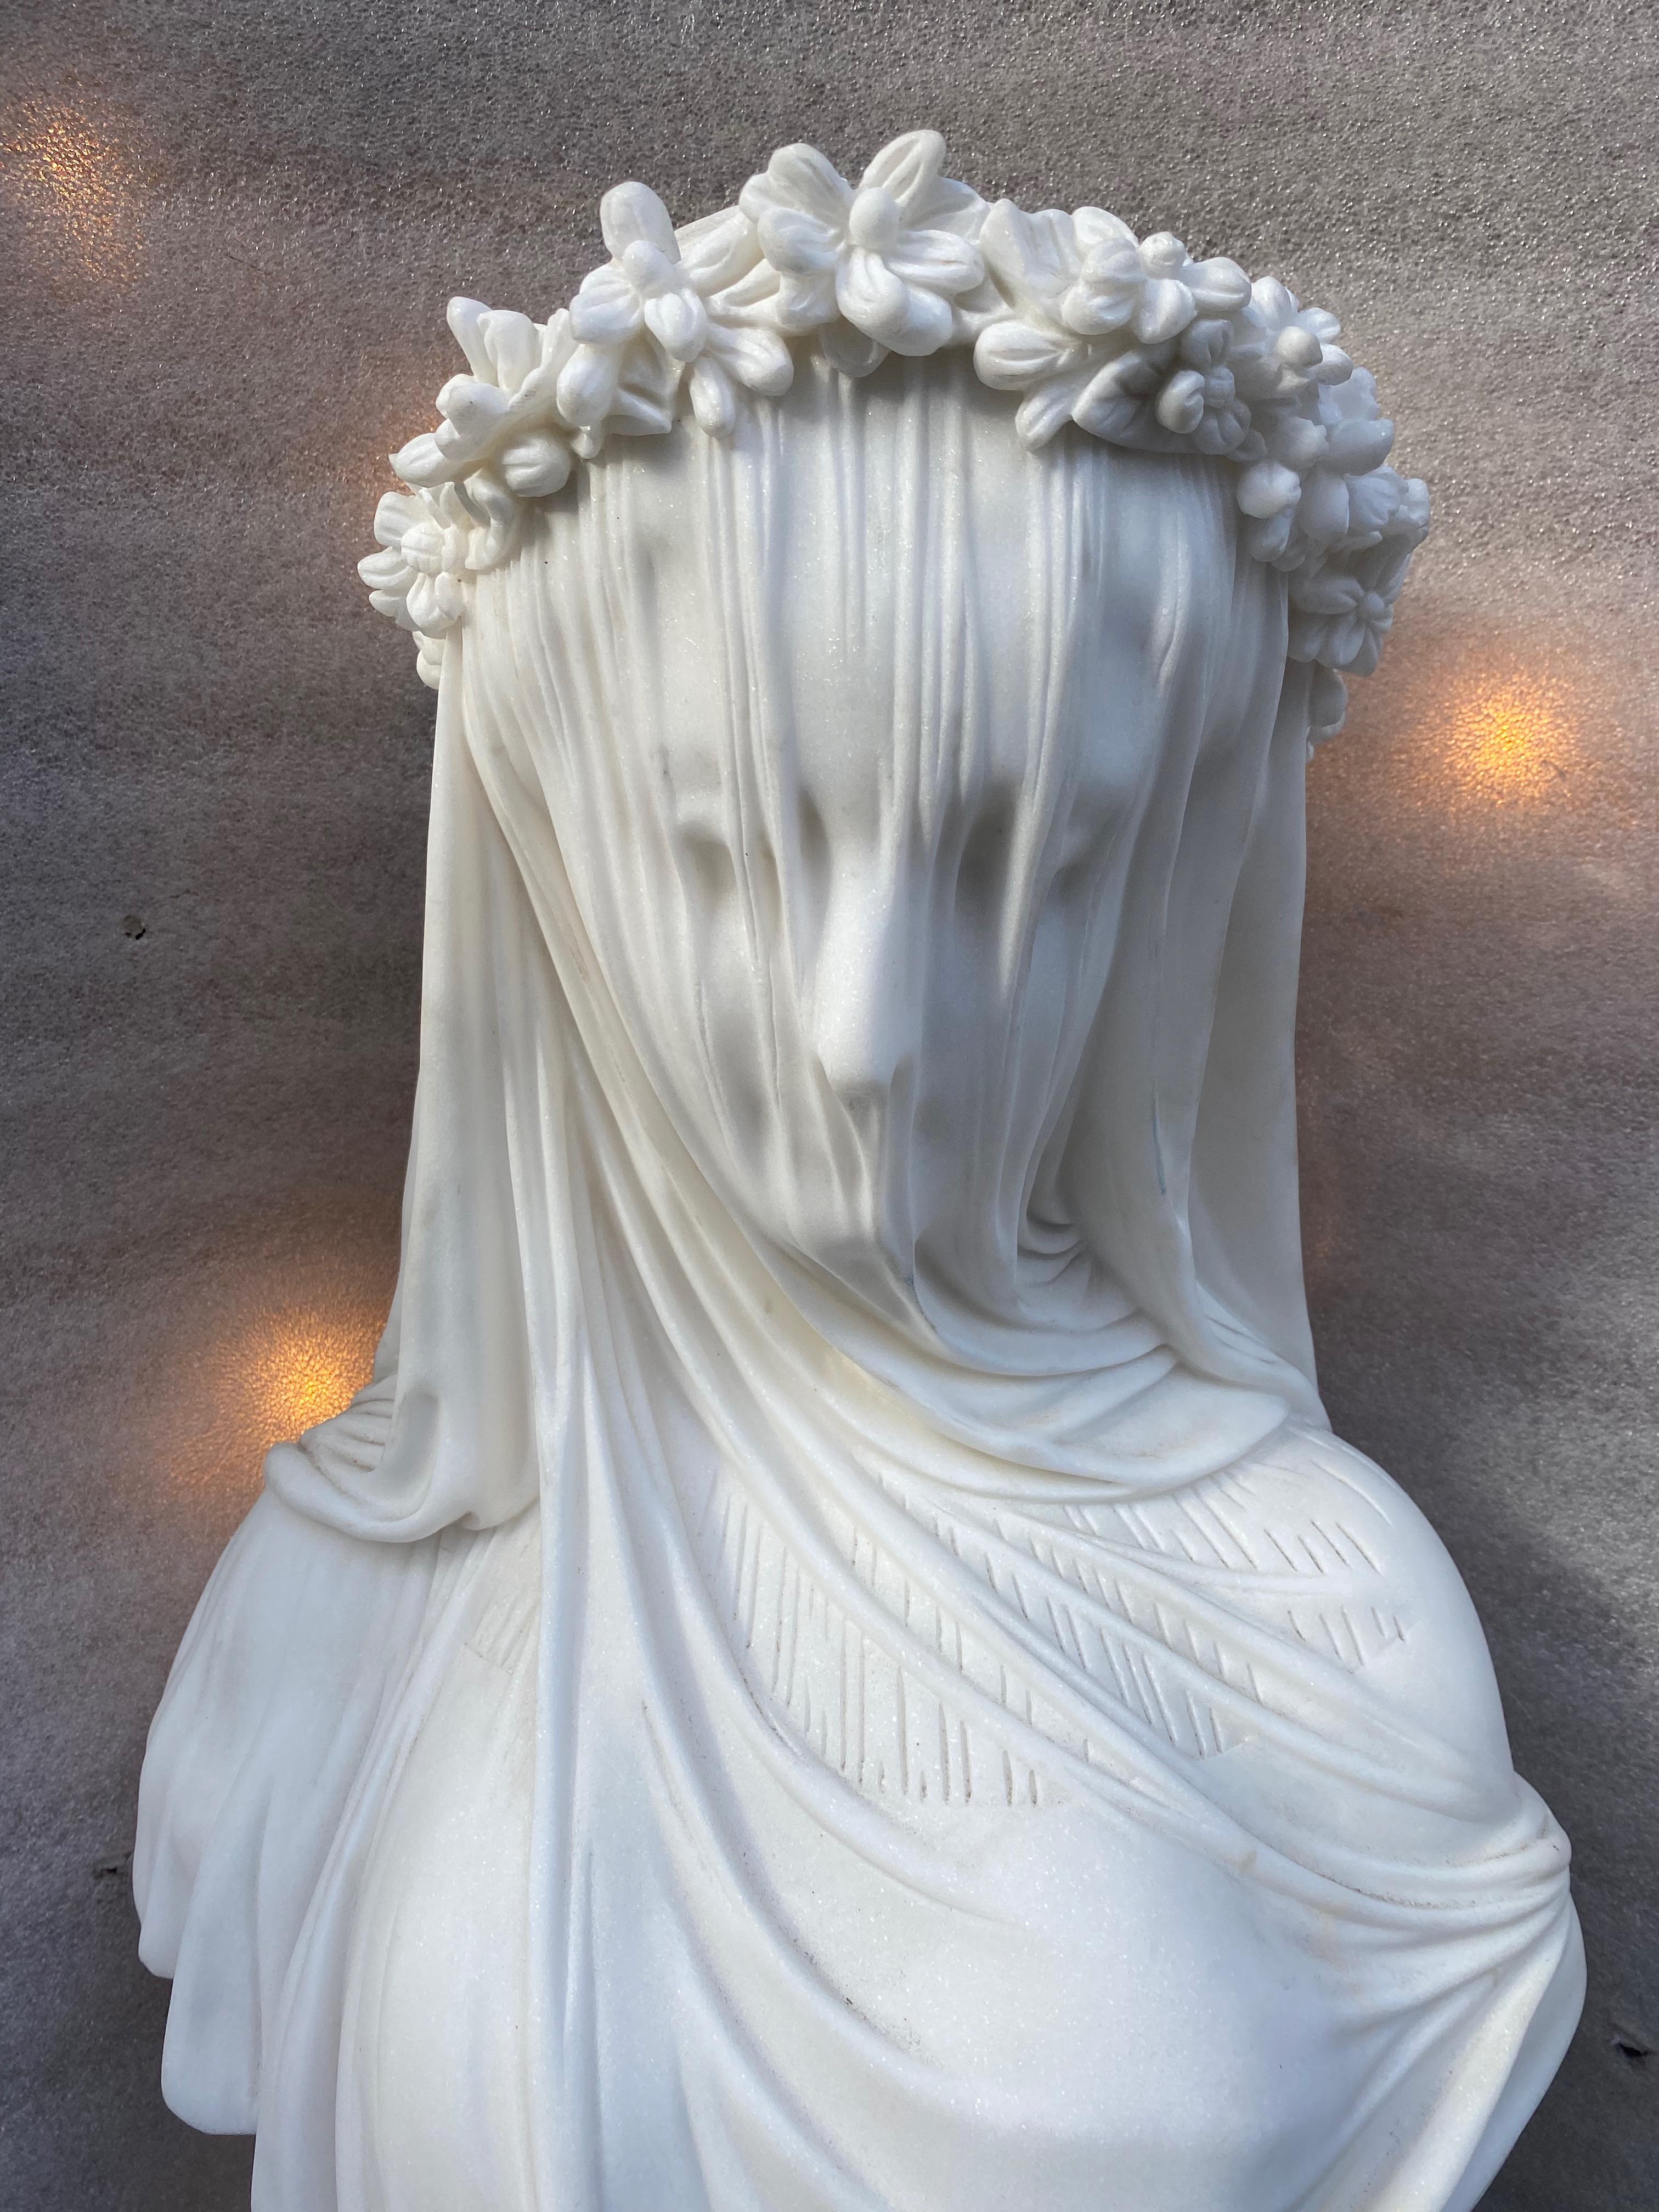 Bust of a bride with a veil, follower of Giovanni Strazza, author of The Veiled Virgin, sculptor of transparency.
Anonymous piece that the best sculptors could achieve given the complexity of transparency with Carrara marble.
Good